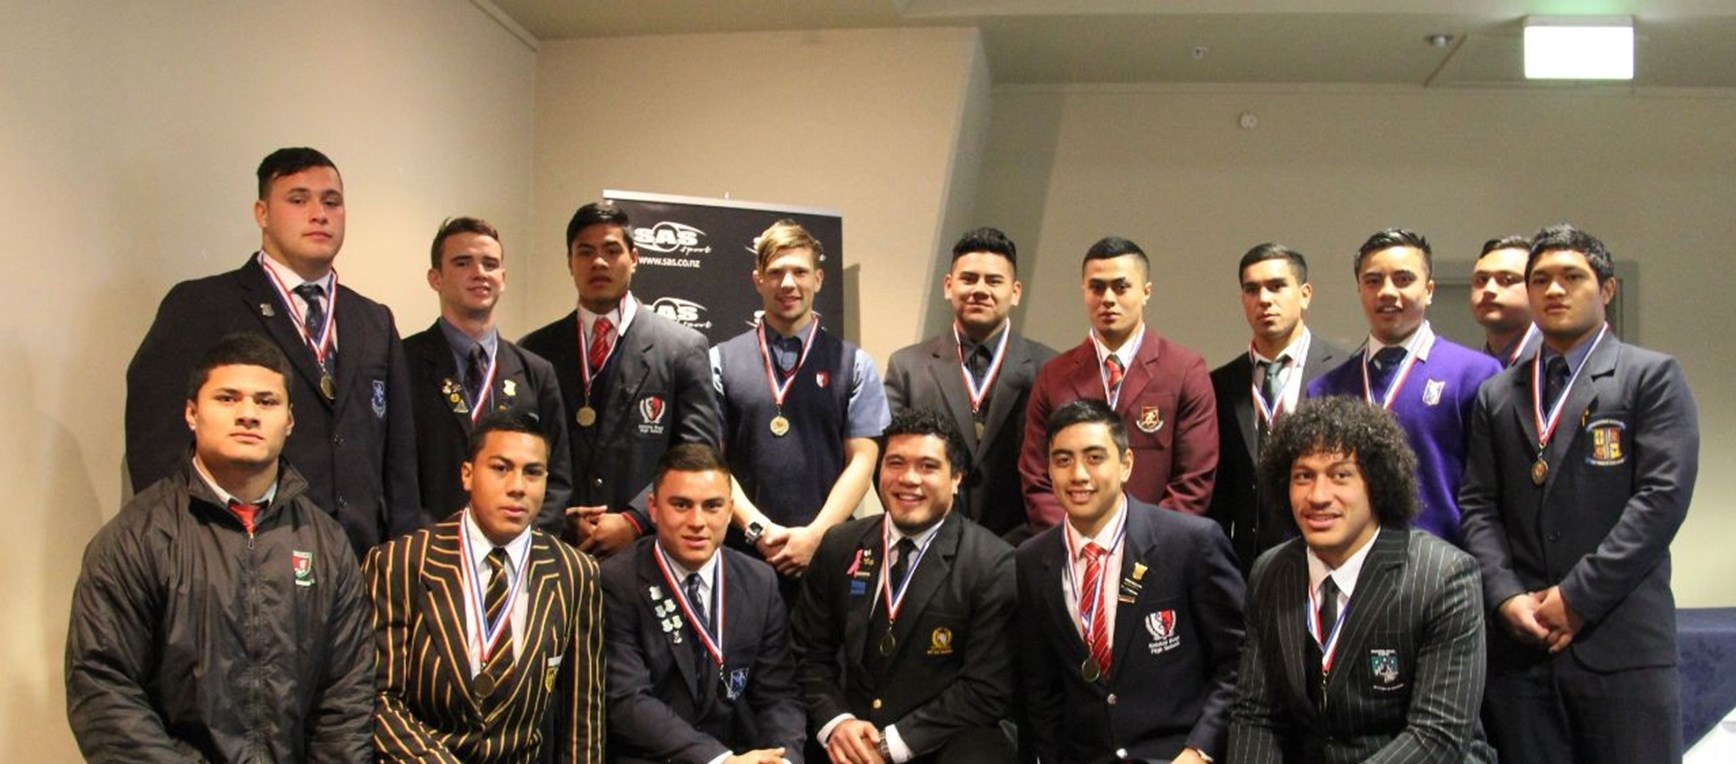 In Pictures | 2014 College Rugby League awards